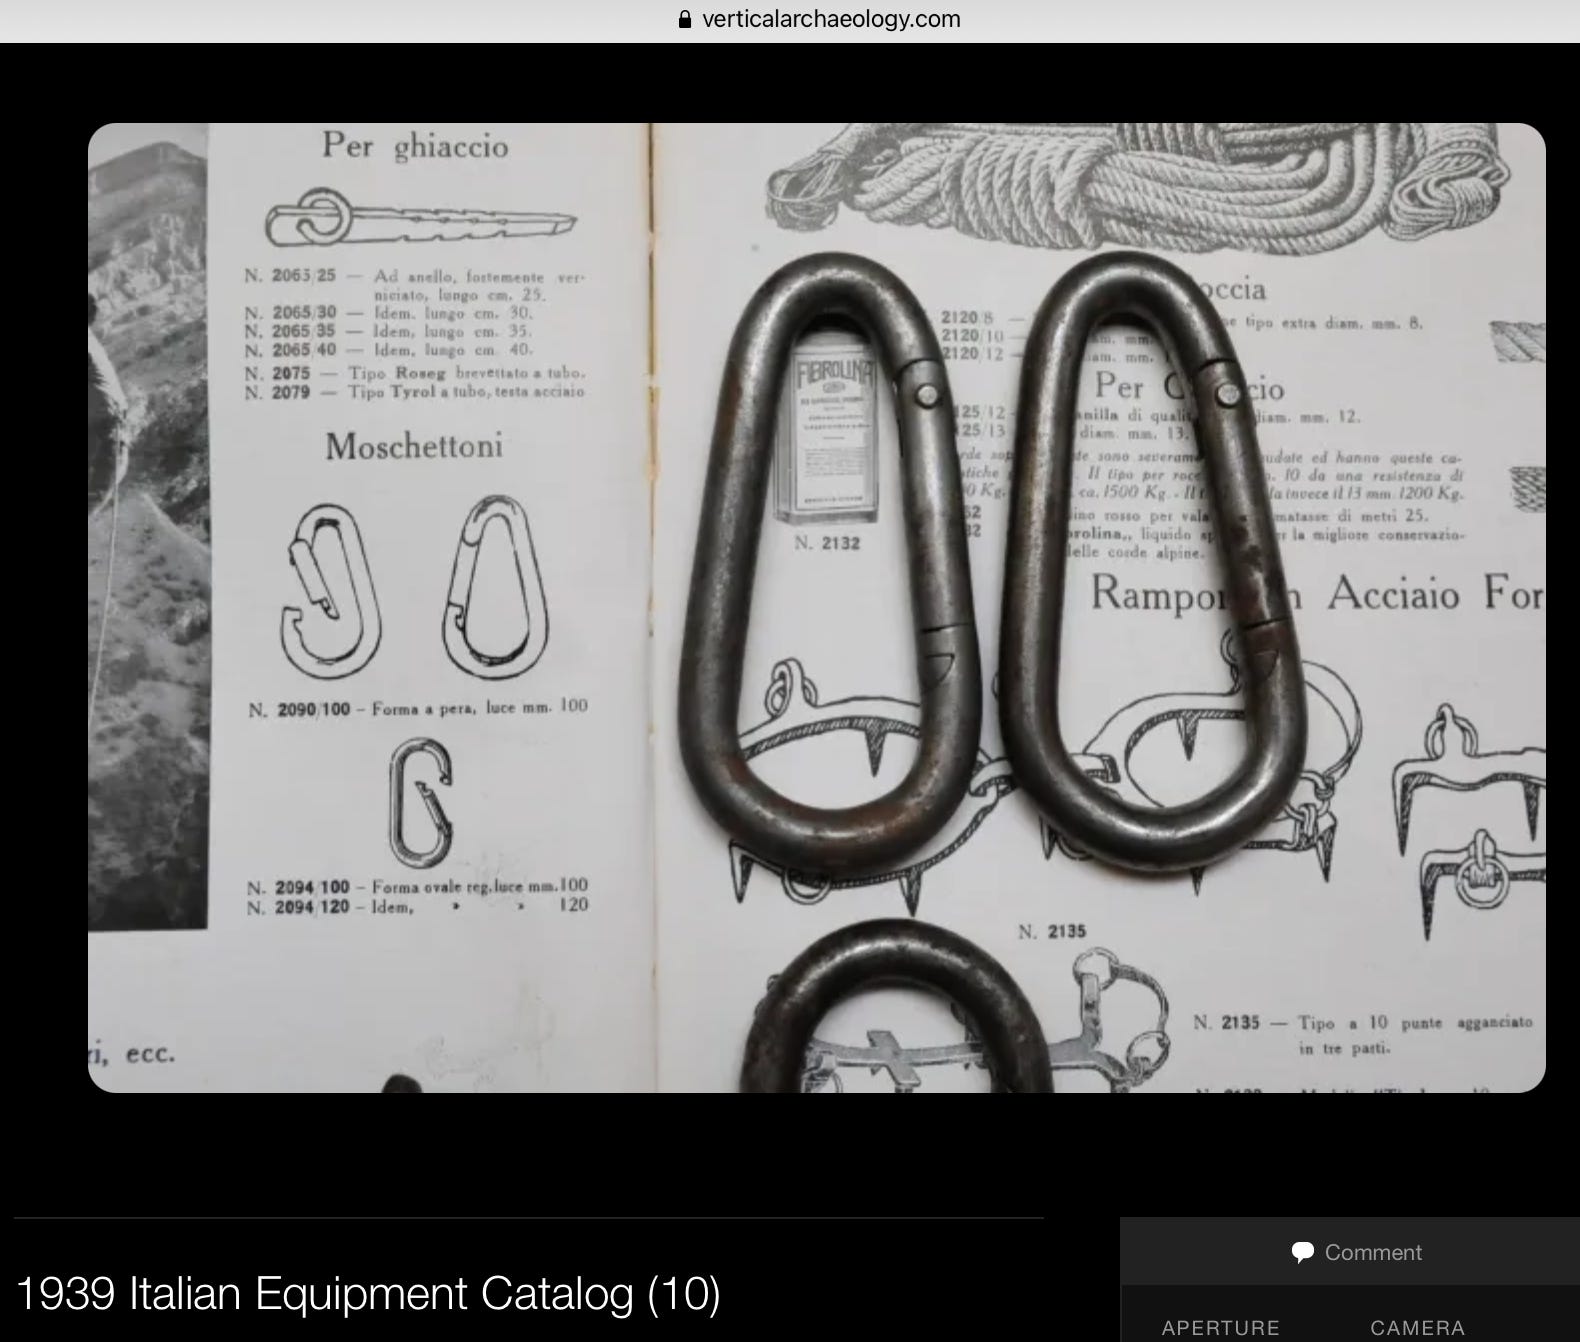 Climbing Tools and Techniques—1908 to 1939 (Europe, PartA) Myths